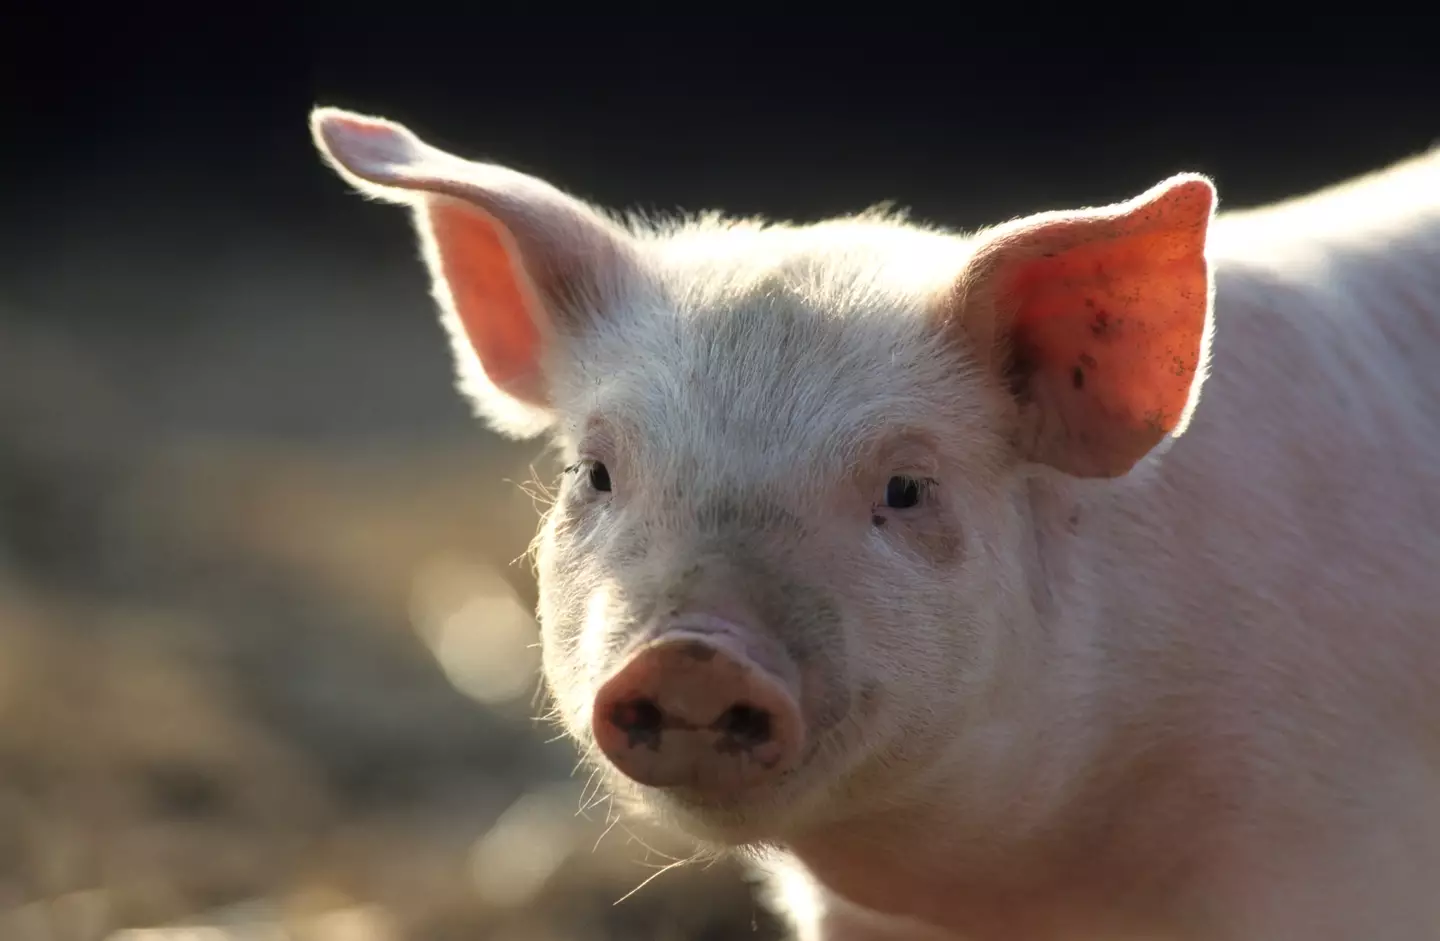 Scientists used a device to bring dead pigs hearts back to life an hour after death.